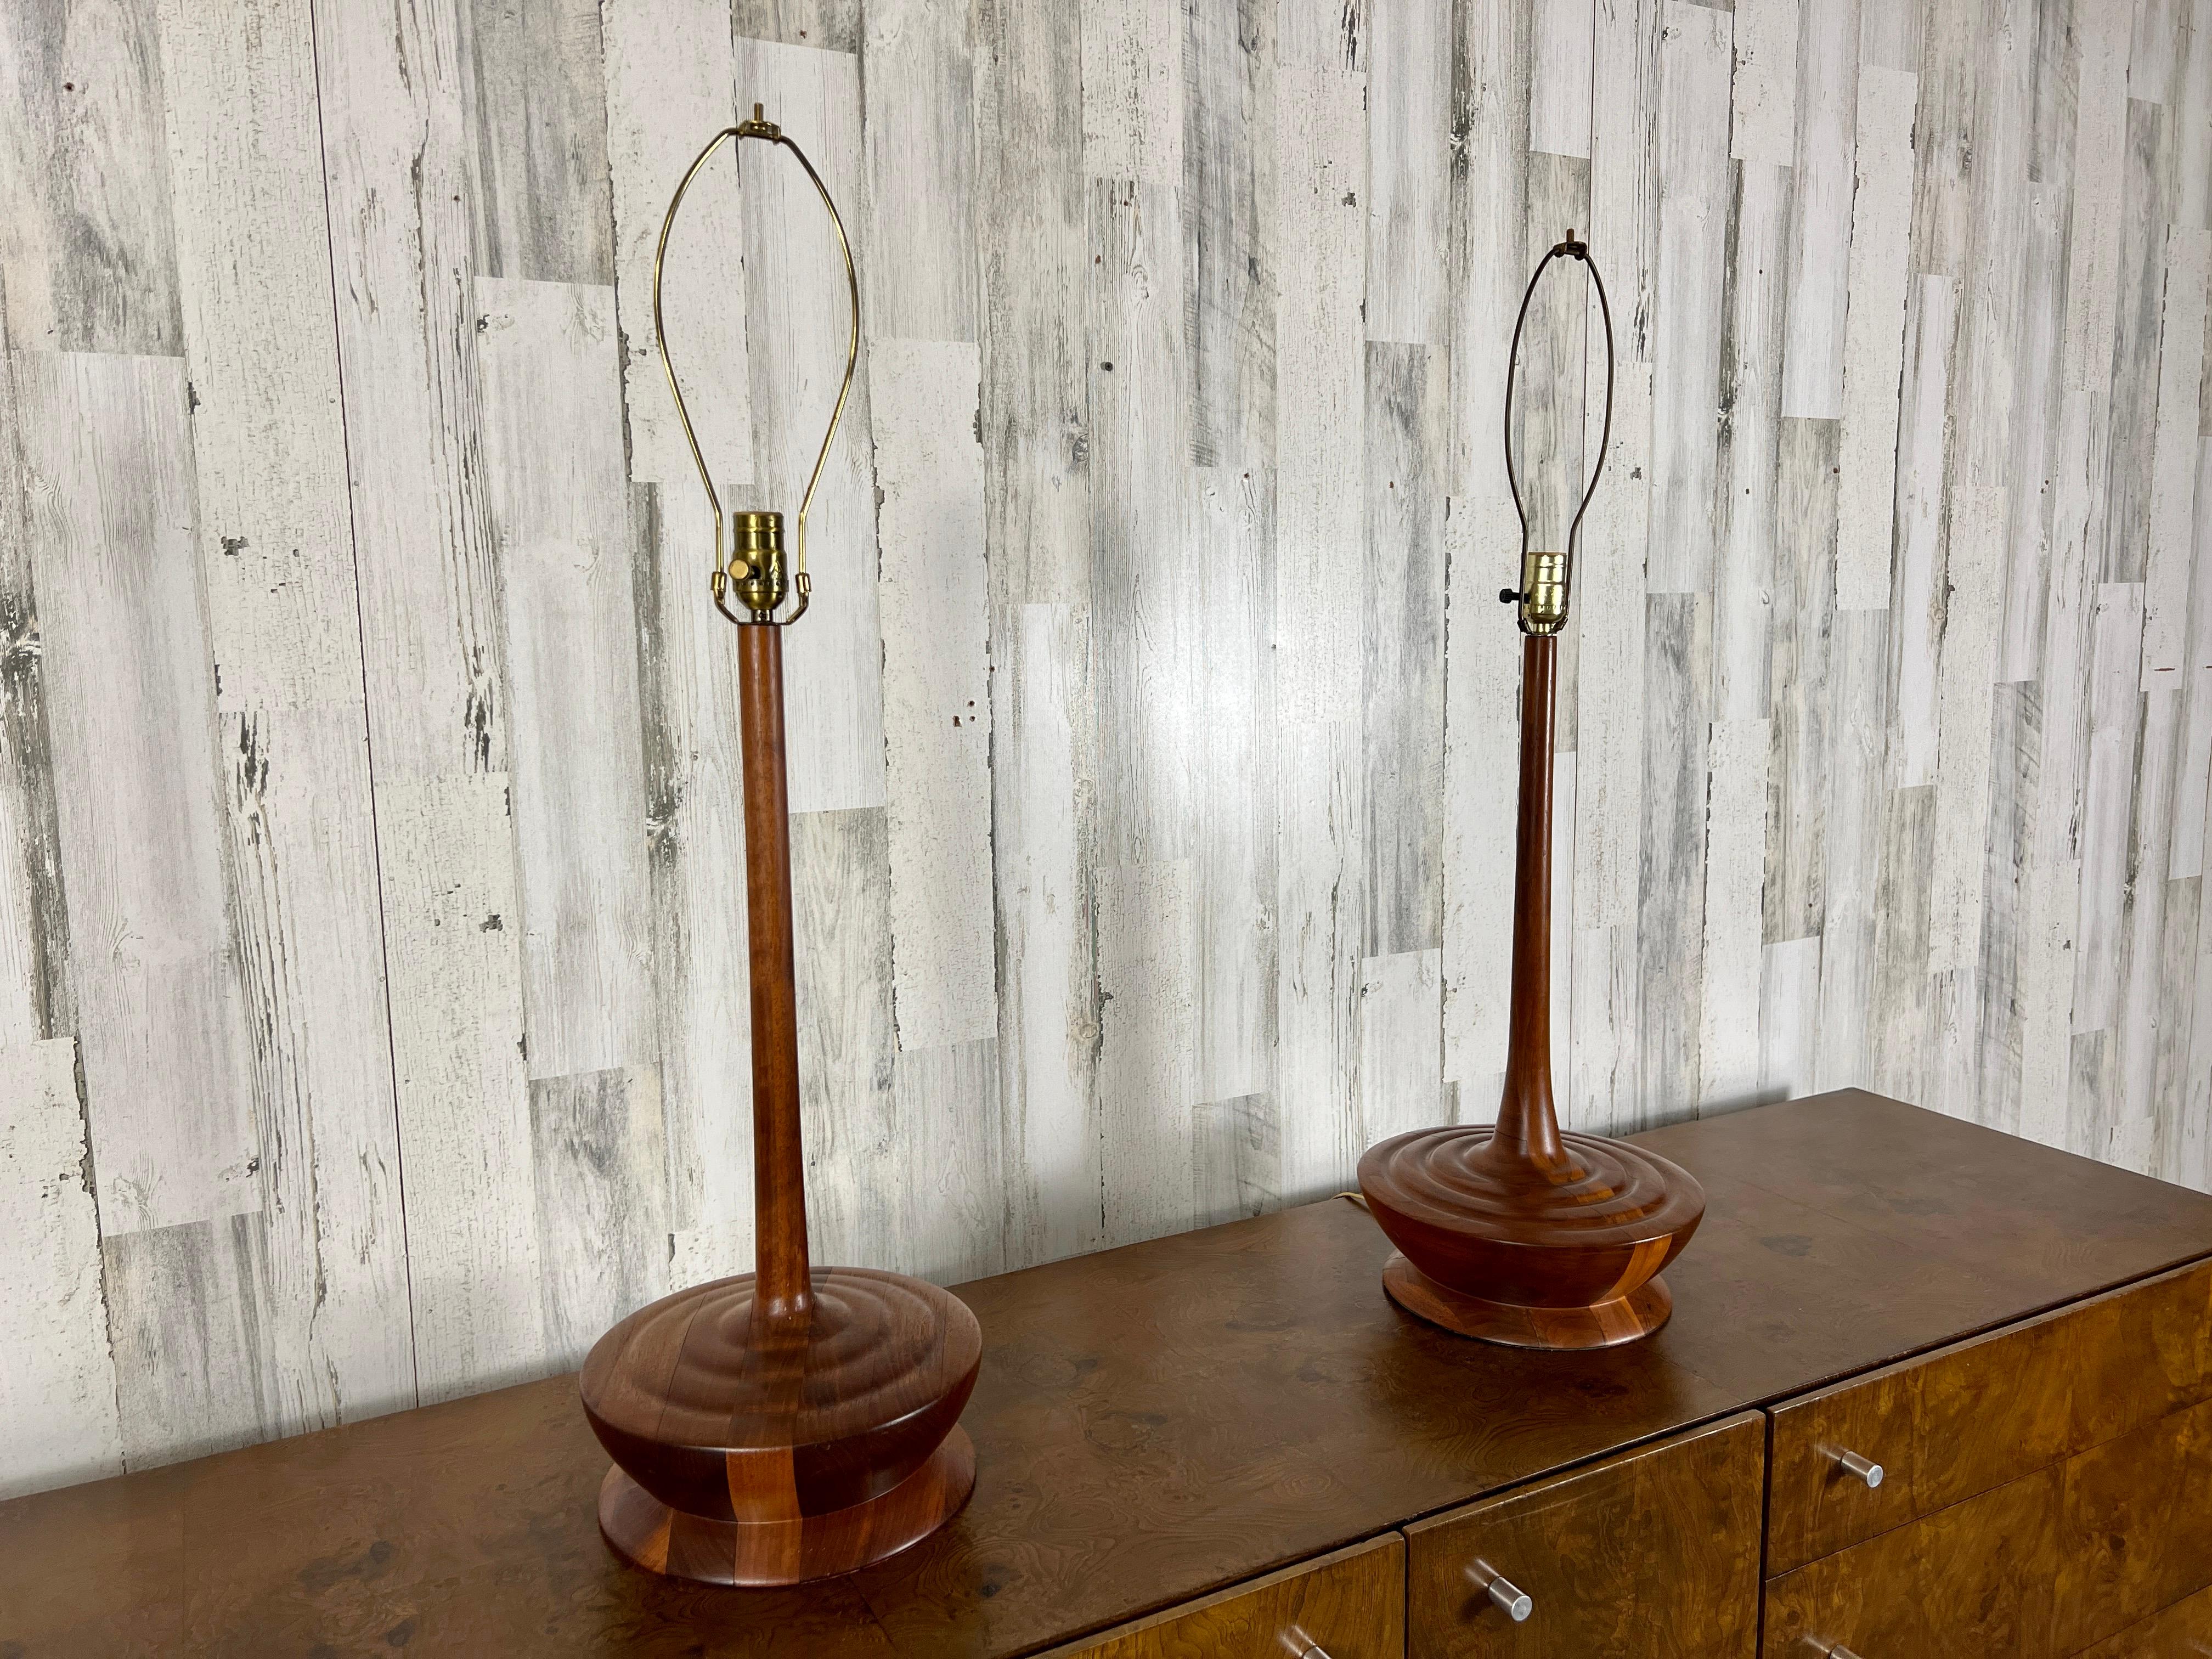 Very tall slender teak pole that protrudes from the ample base with ripple design.
Unusual design make these stunning lamps very pleasing to the eye.
Shades not included.